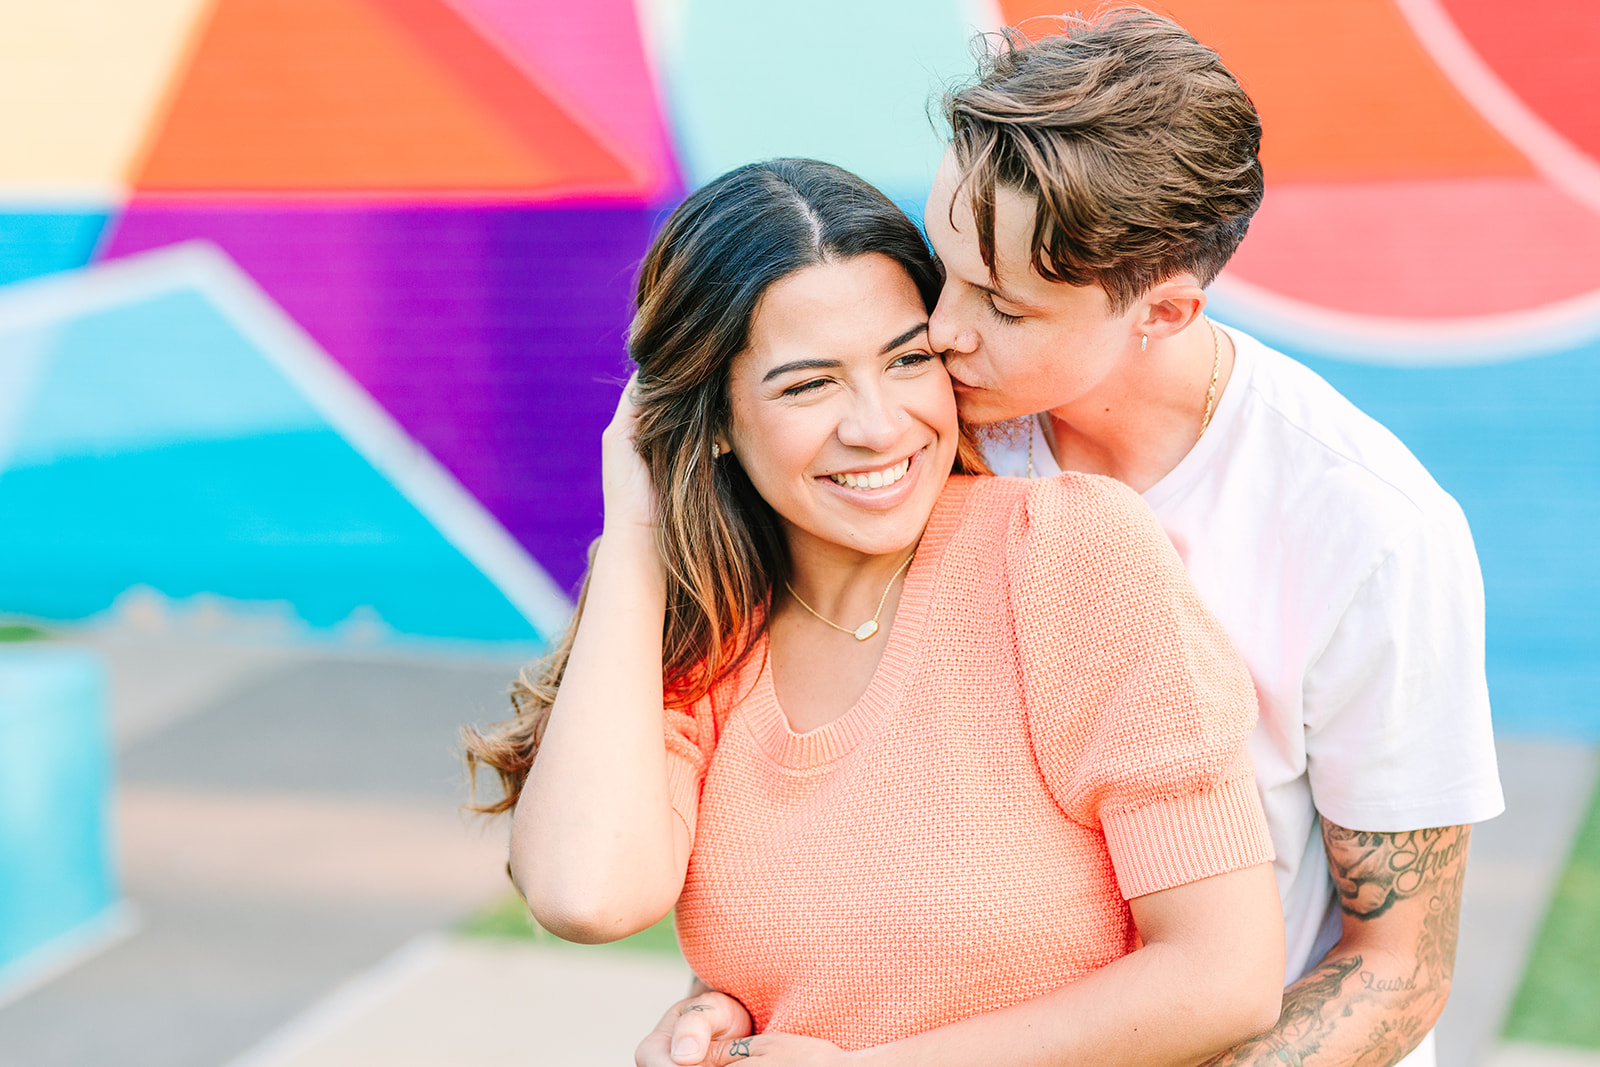 Couple engagement session in downtown Raleigh, North Carolina in front of the colorful mural at the Marbles Kids Museum